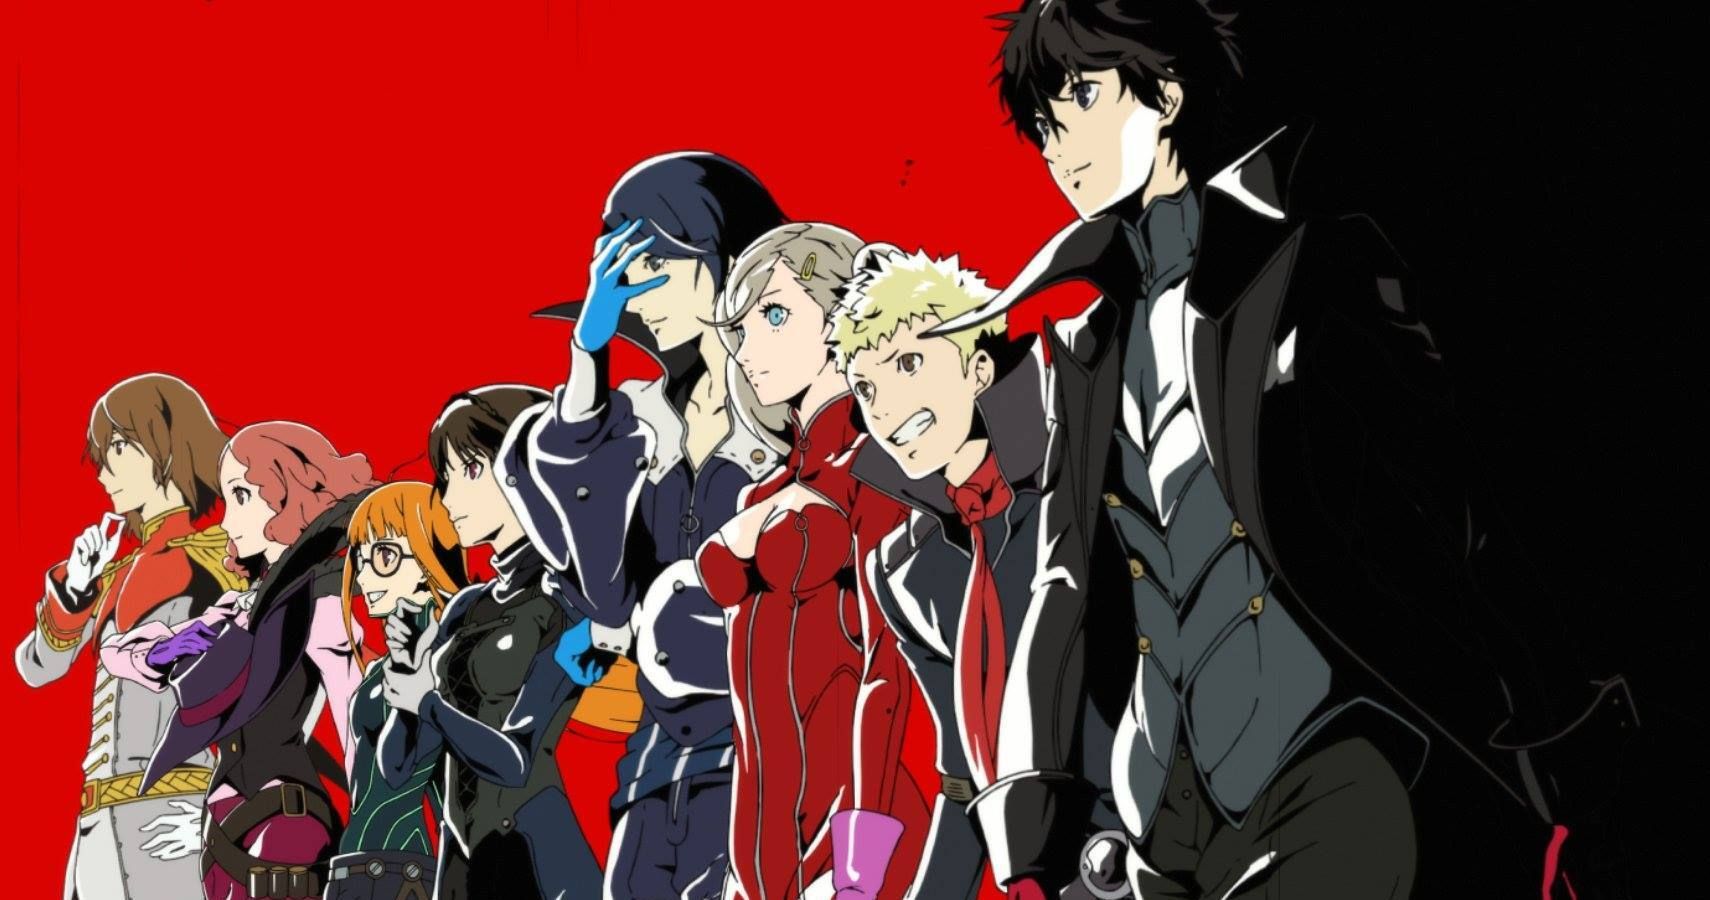 Persona 5: Which Phantom Thief Are You Based On Your Zodiac Type?